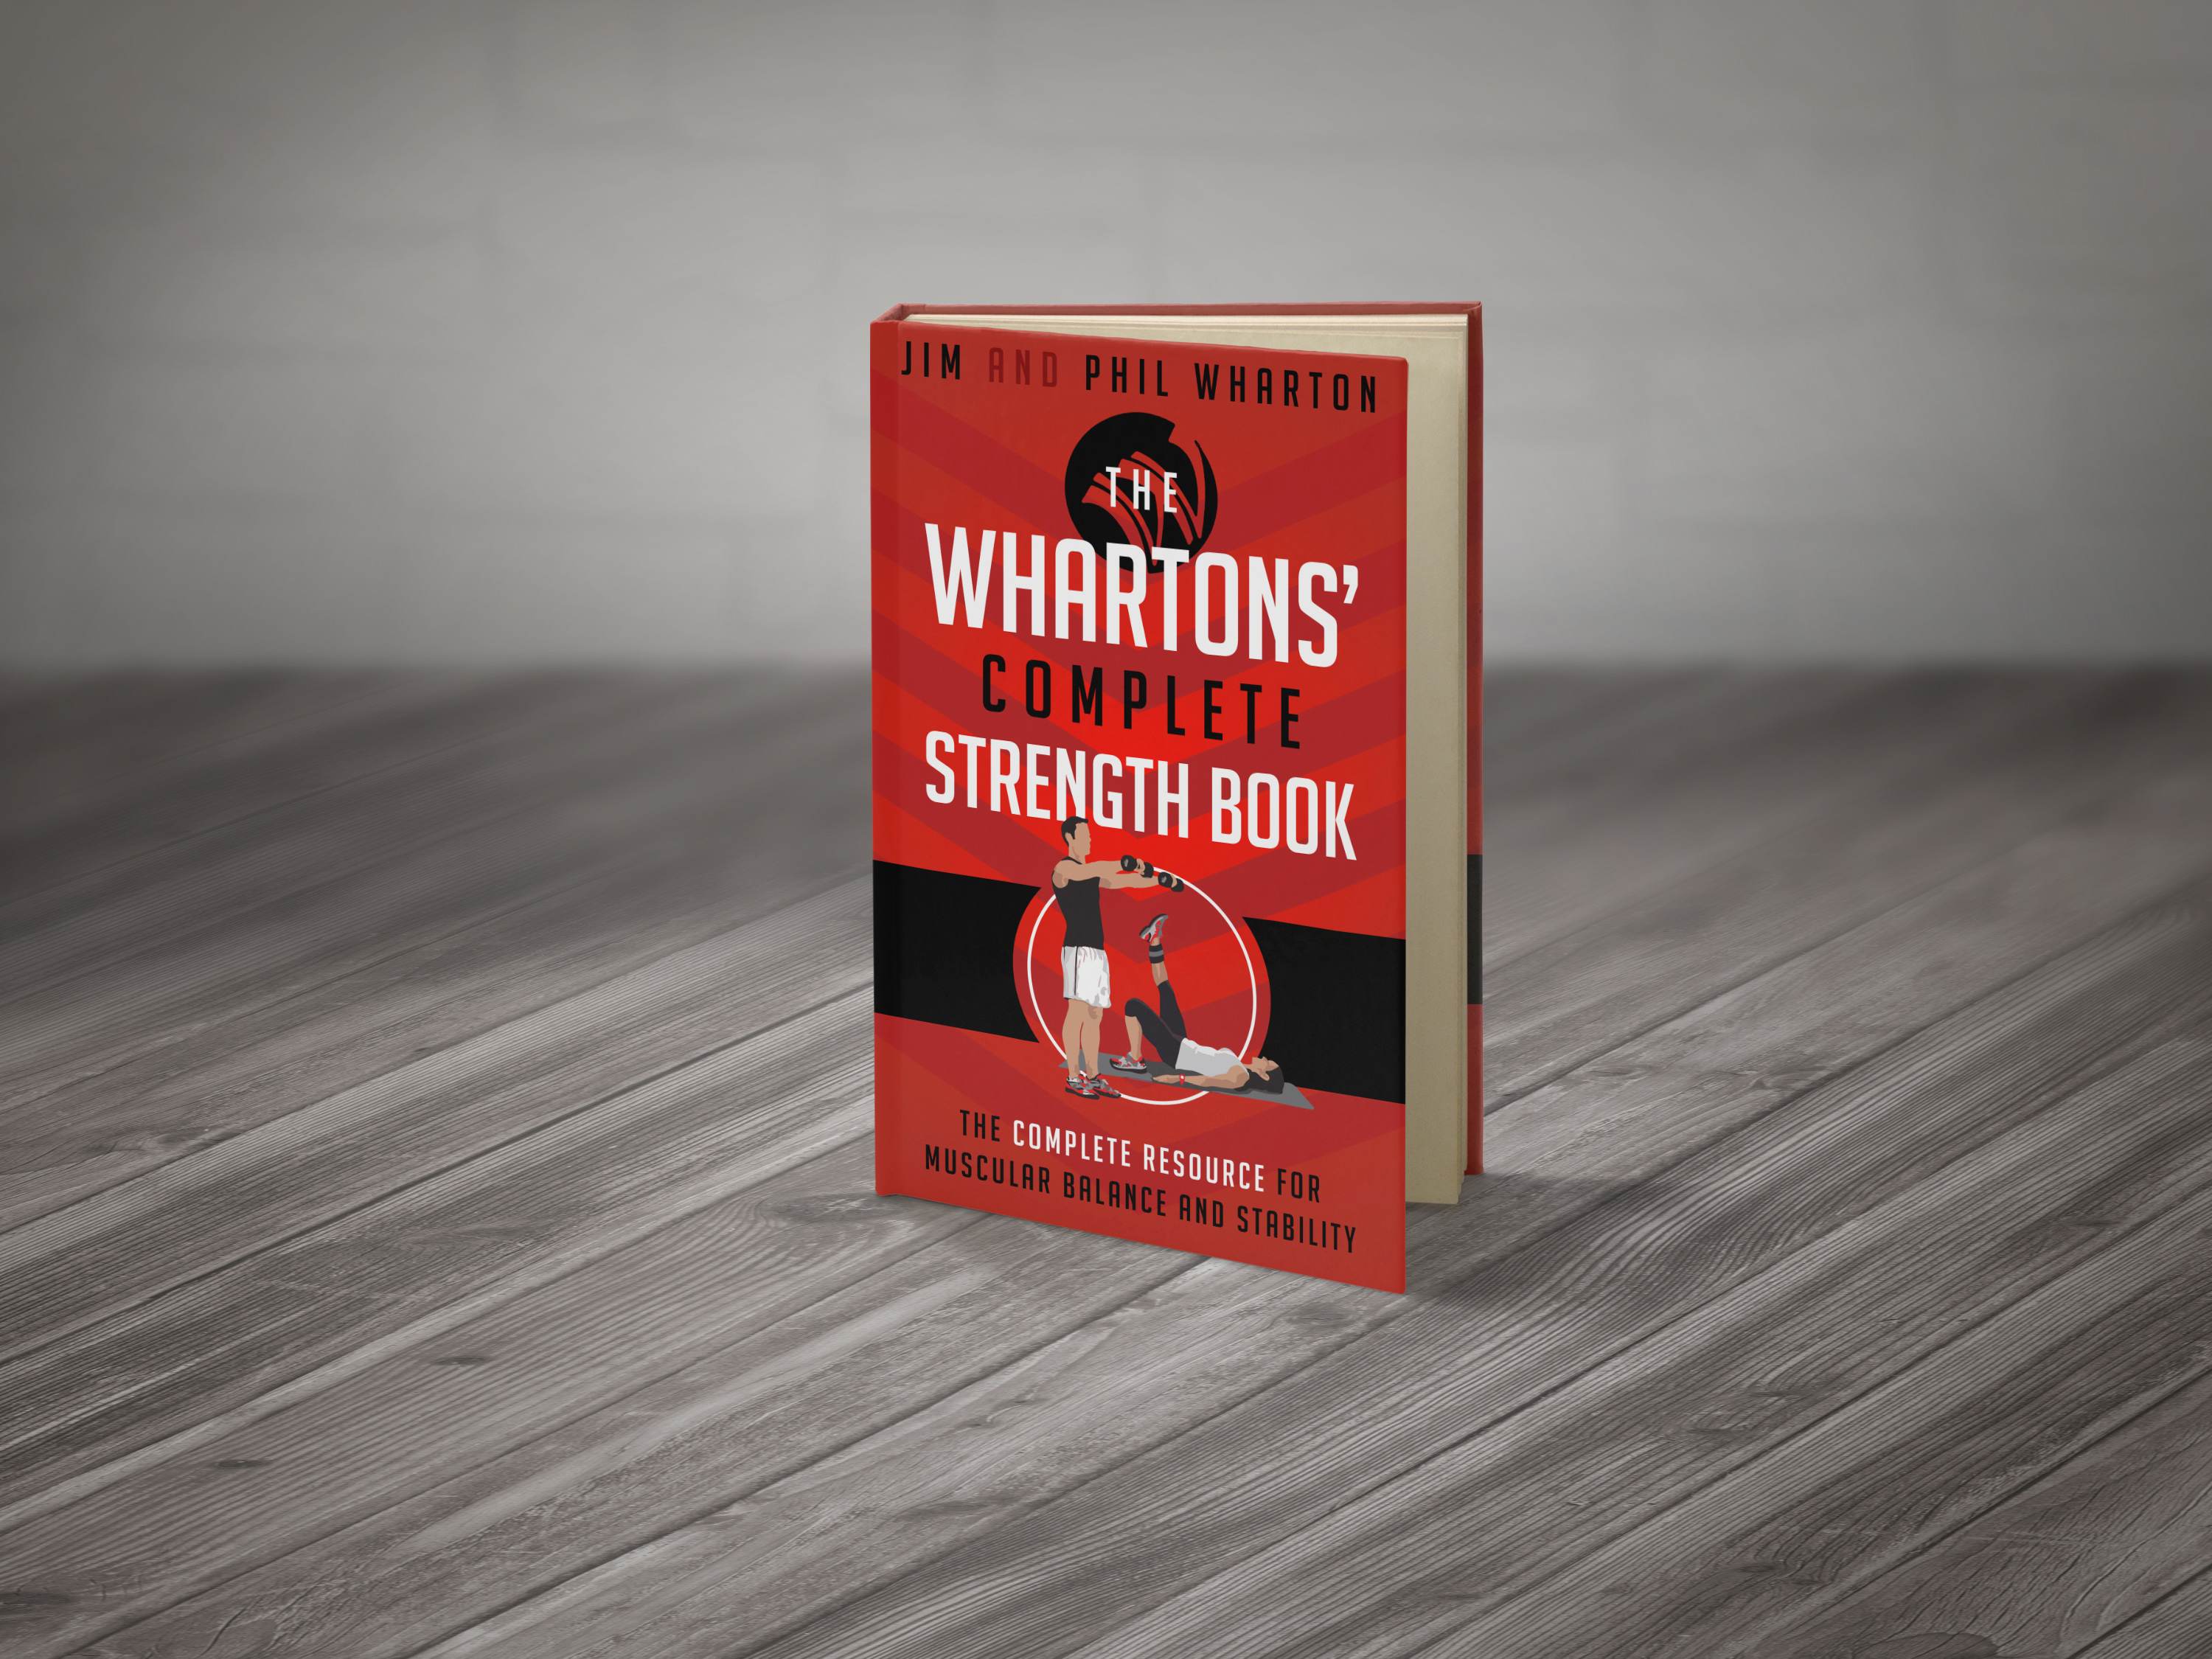 The Whartons' Complete Strength Book